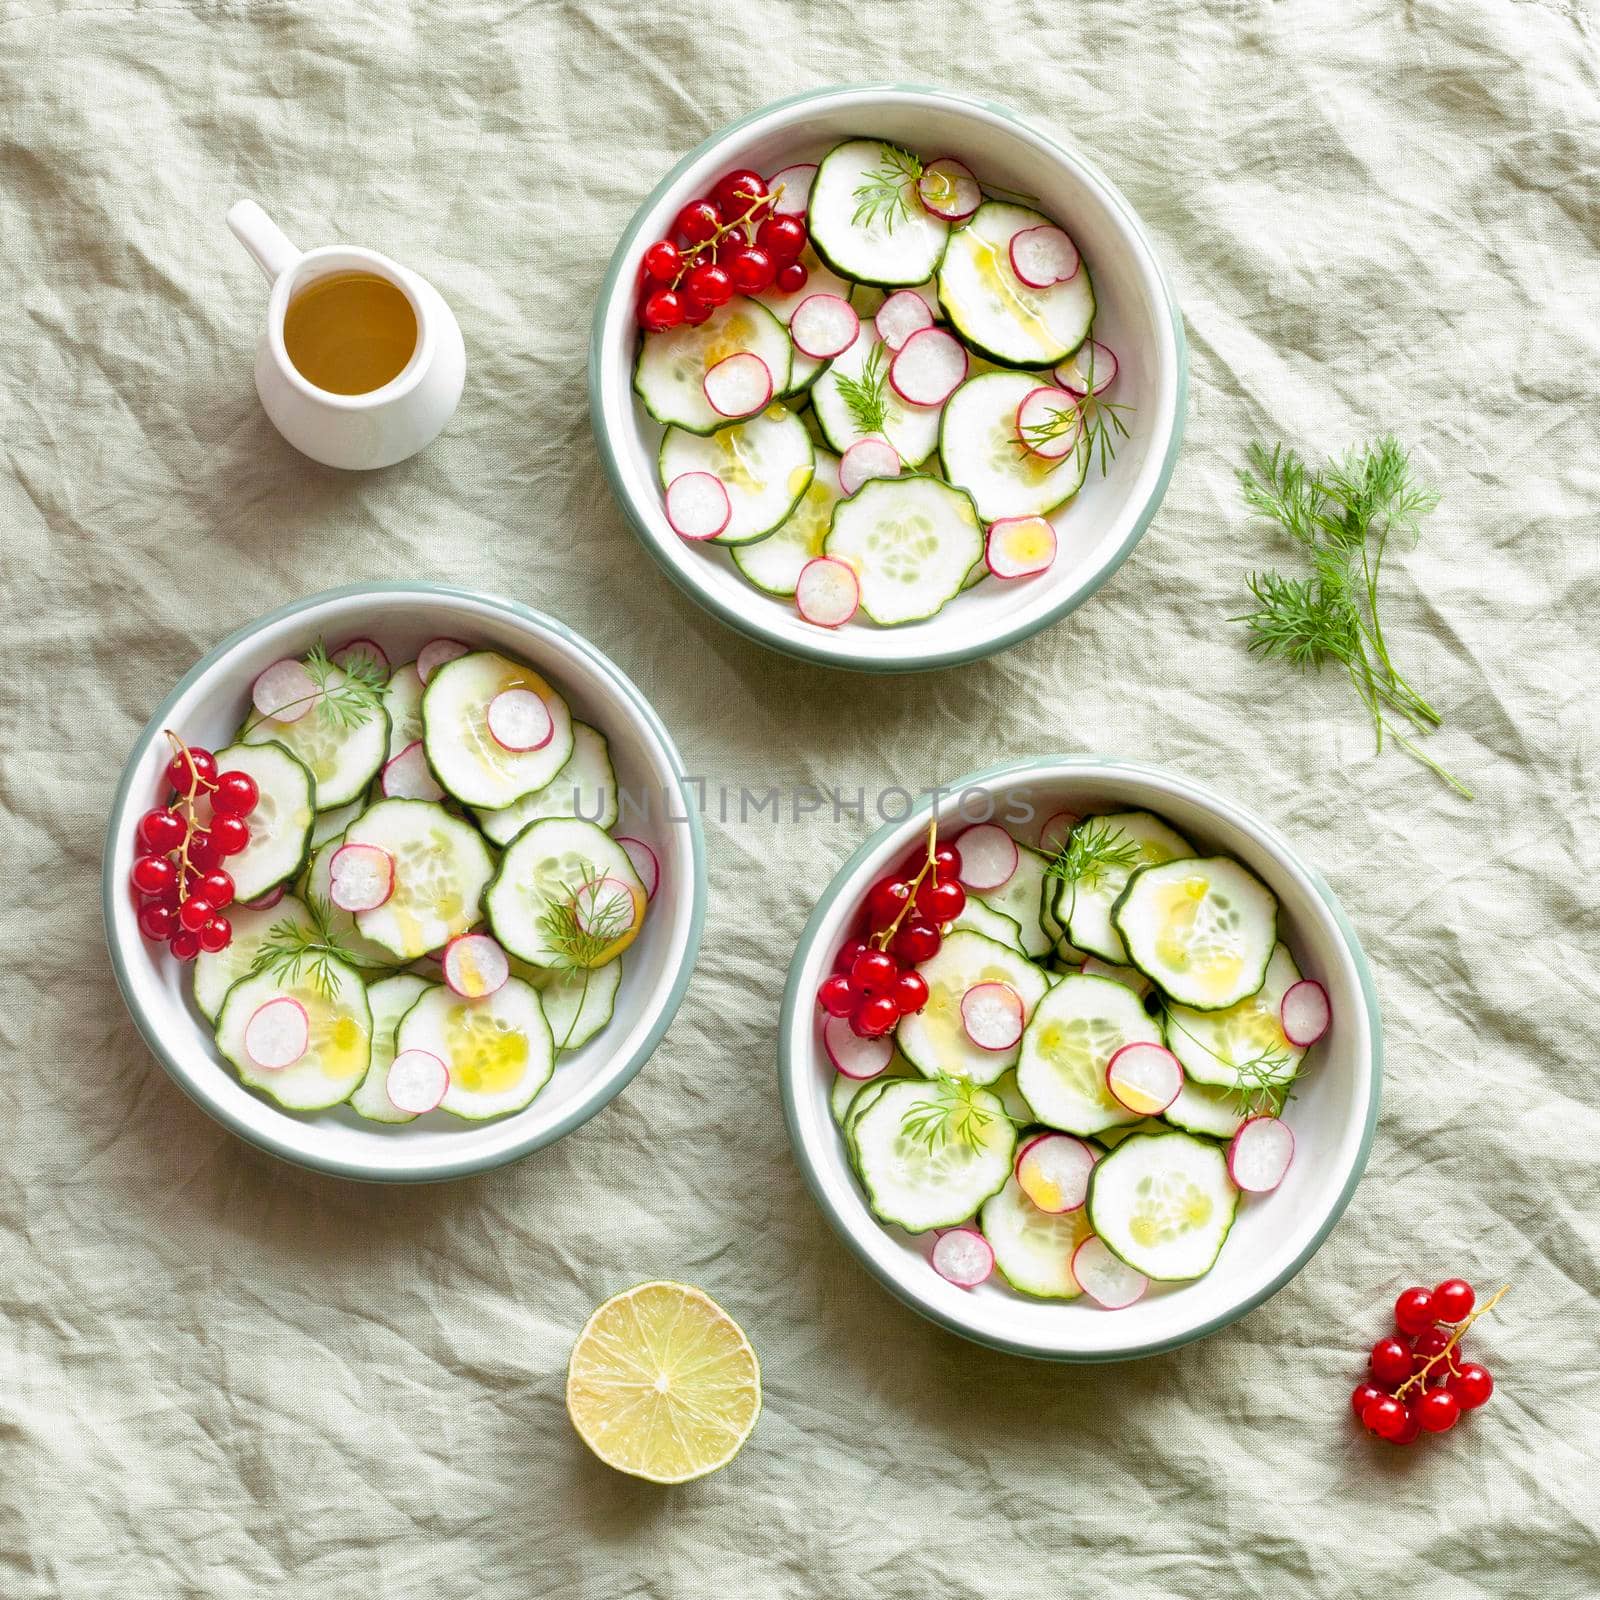 radish and cucumber salad served in three round bowls, decorated with red currants, top view